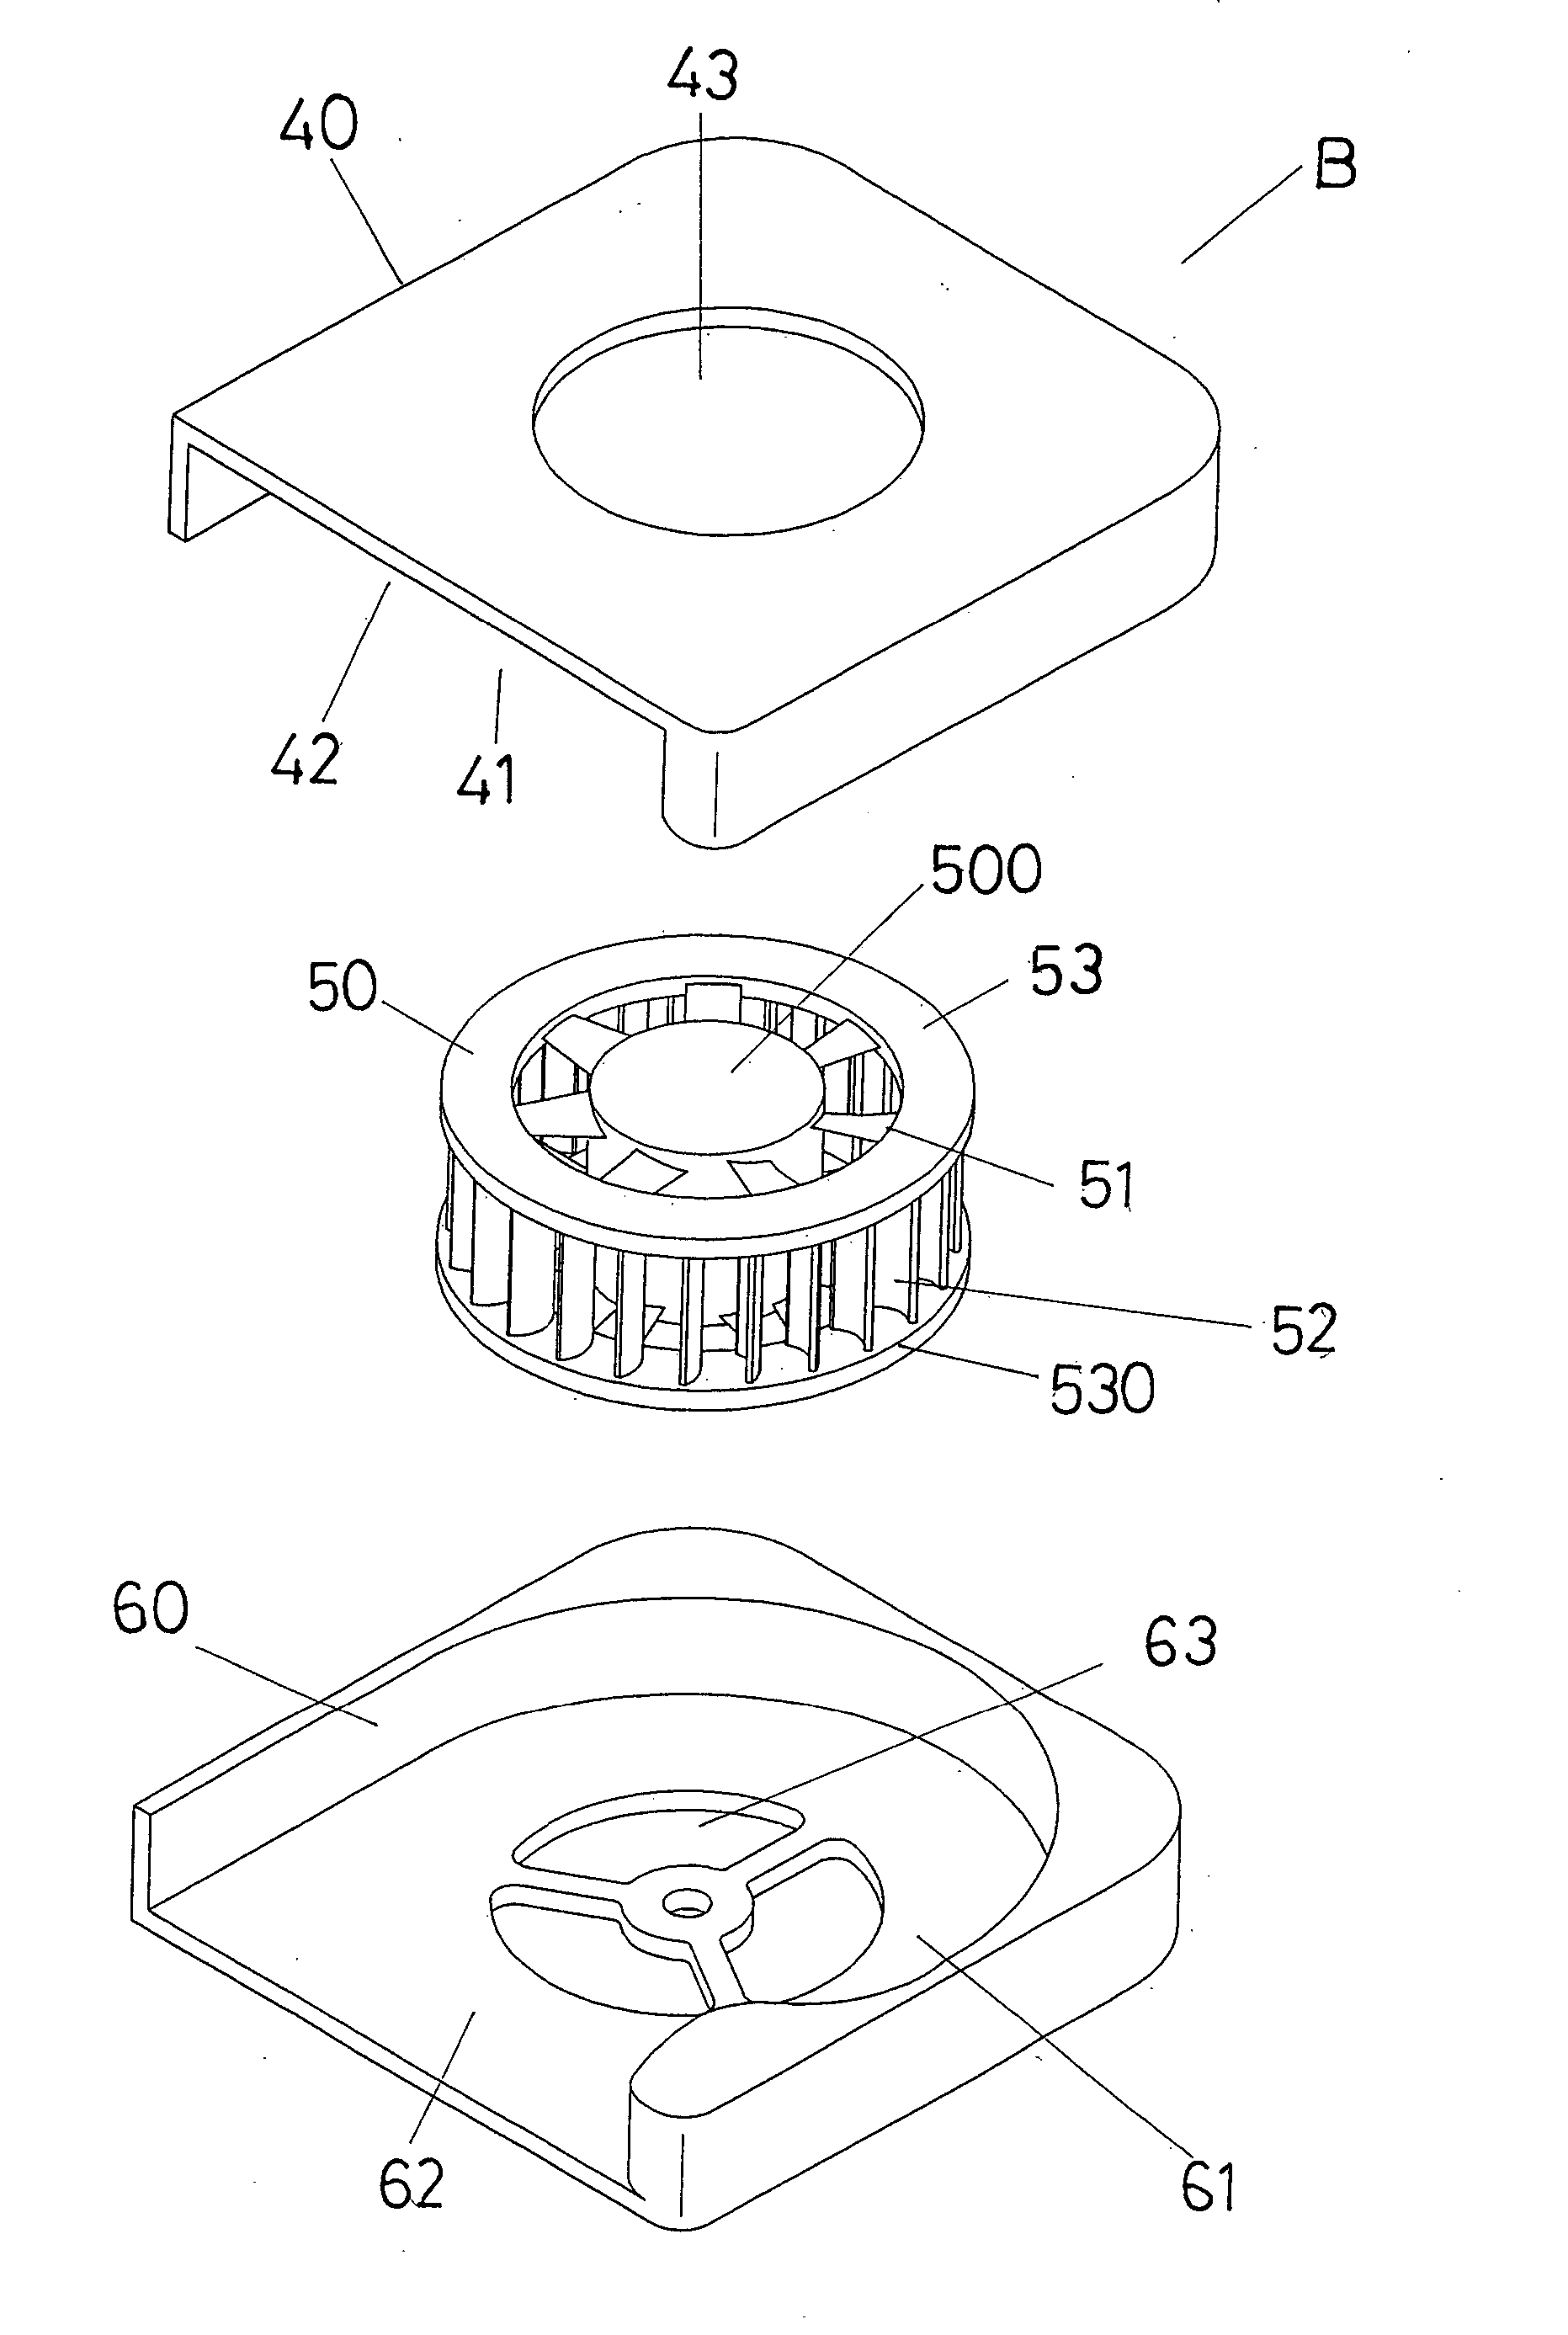 High volume fan device for removing heat from heat sources